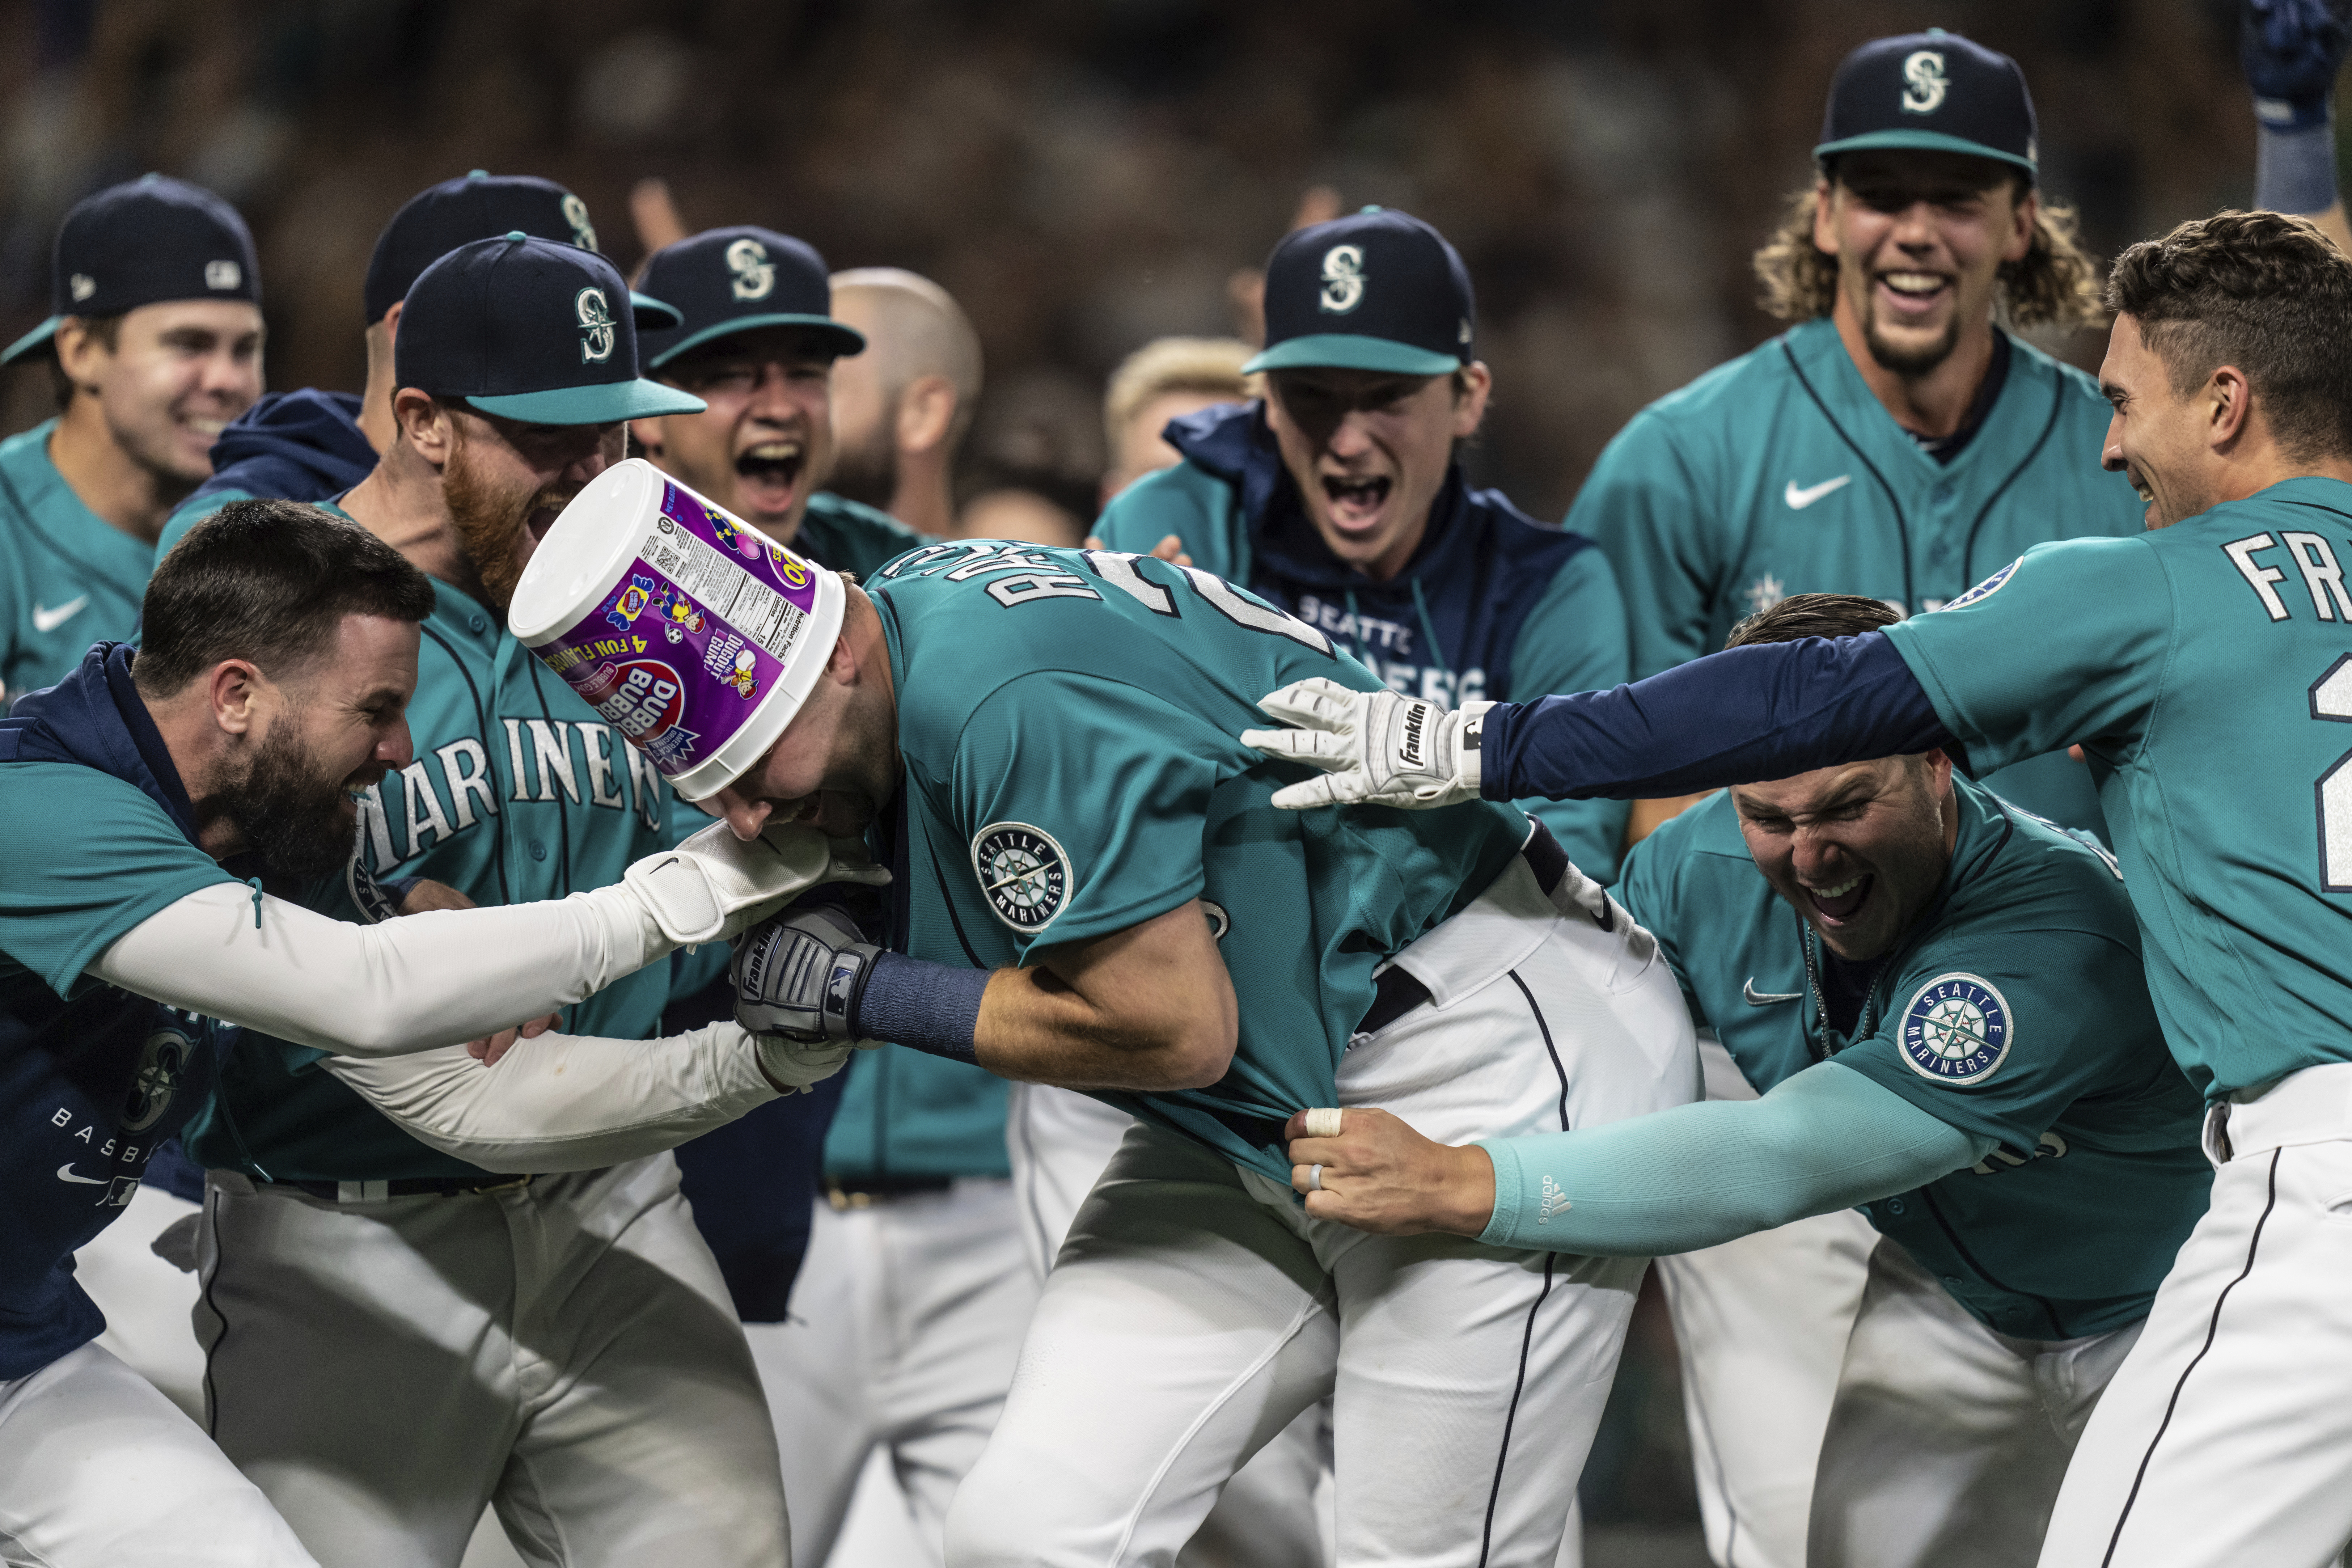 Seattle Mariners on X: Northwest Green hits the road 😍